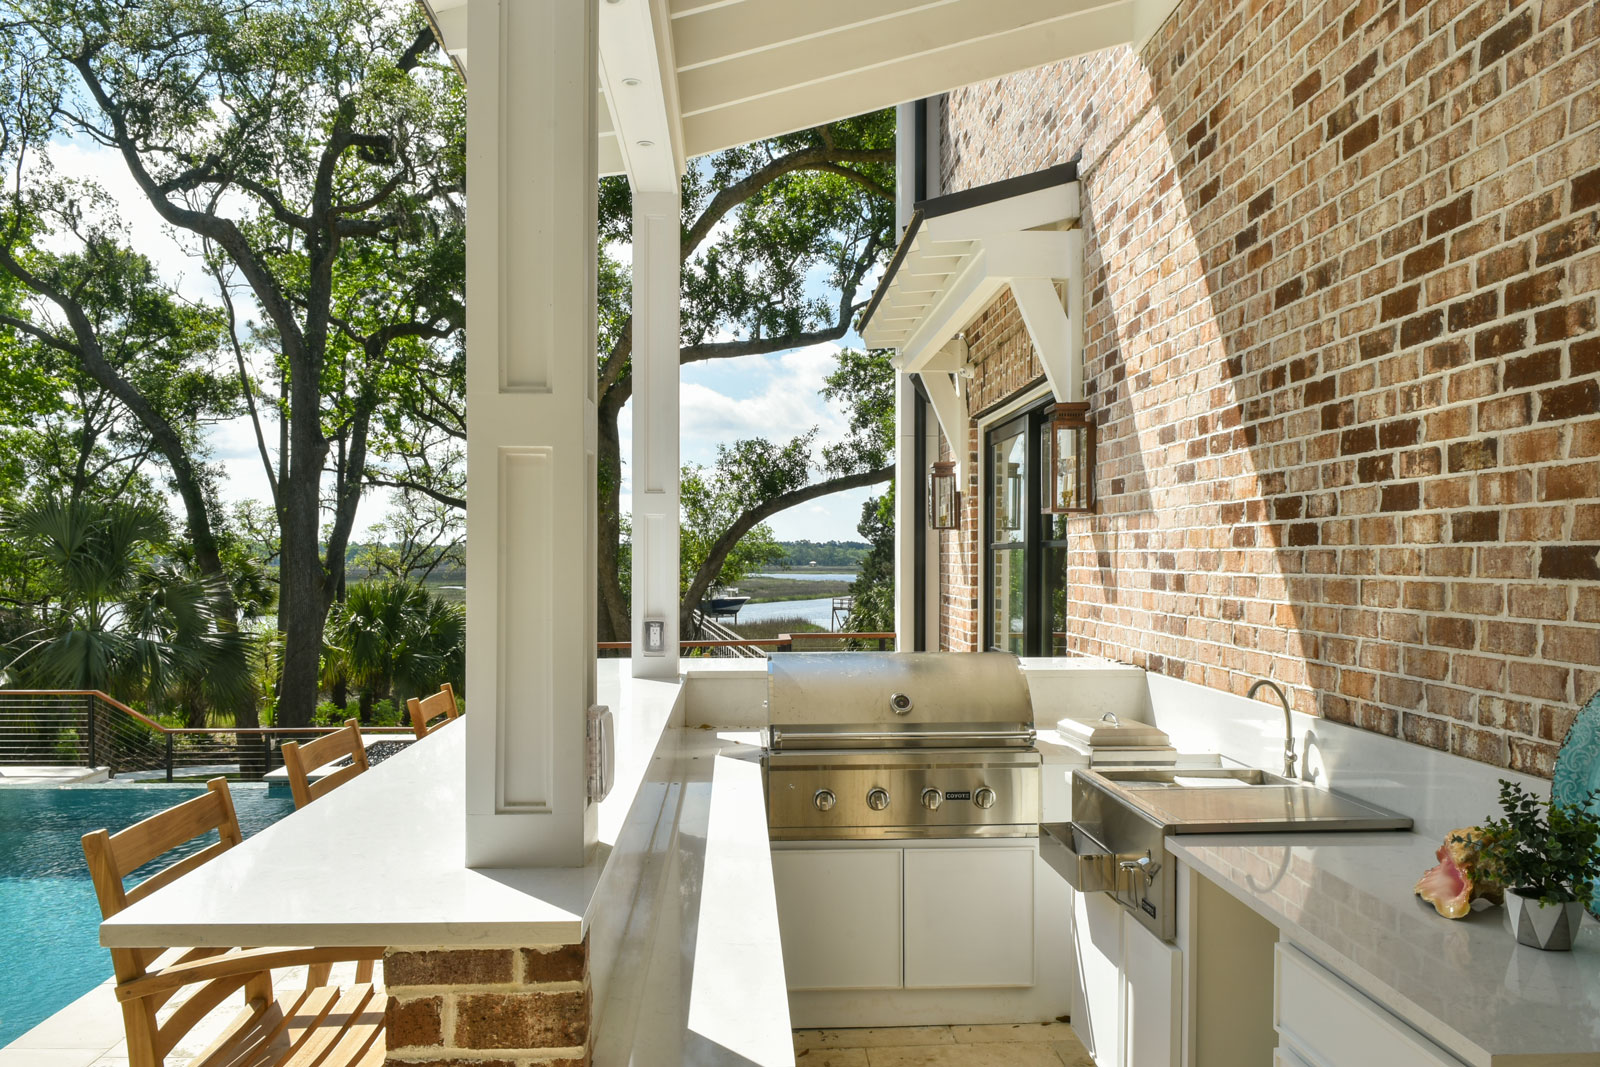 Covered outdoor kitchen with great water views